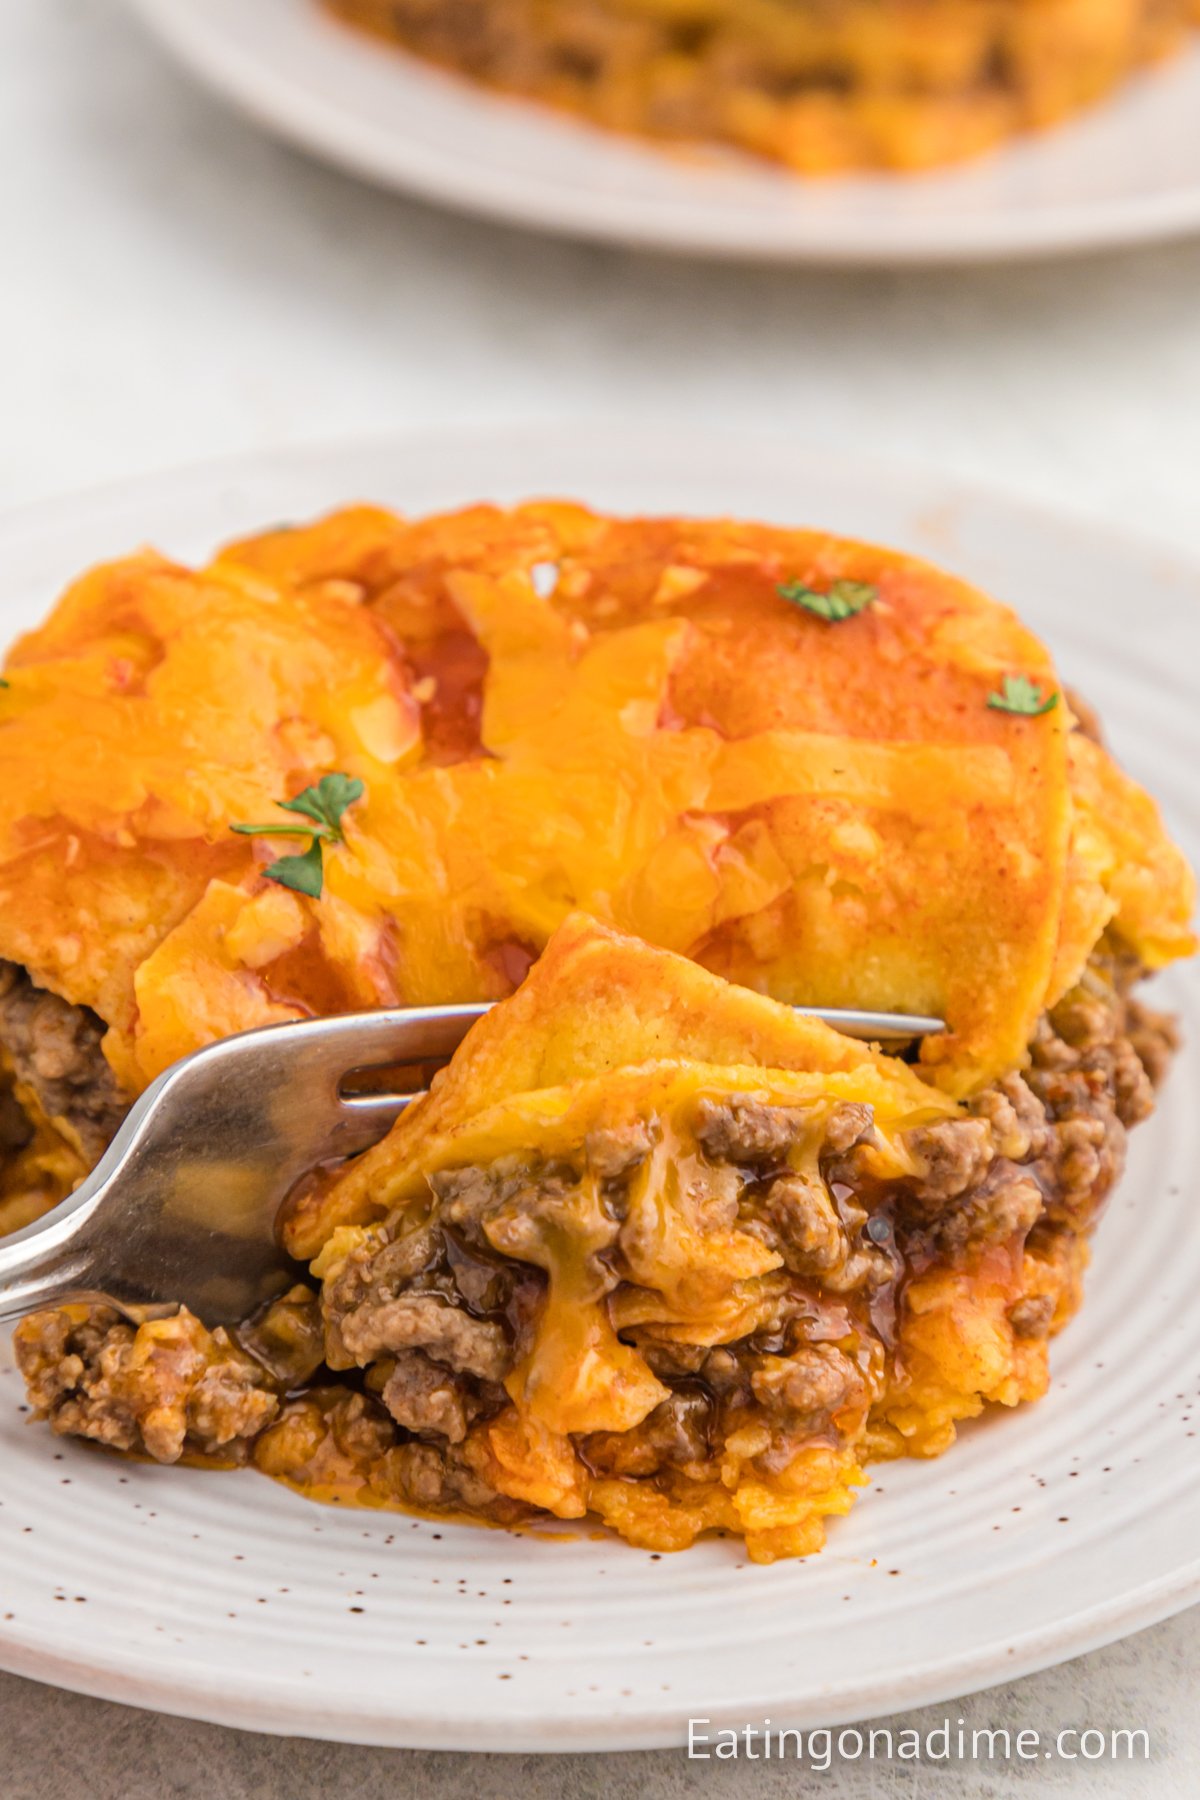 A close up image of beef enchilada casserole on a plate